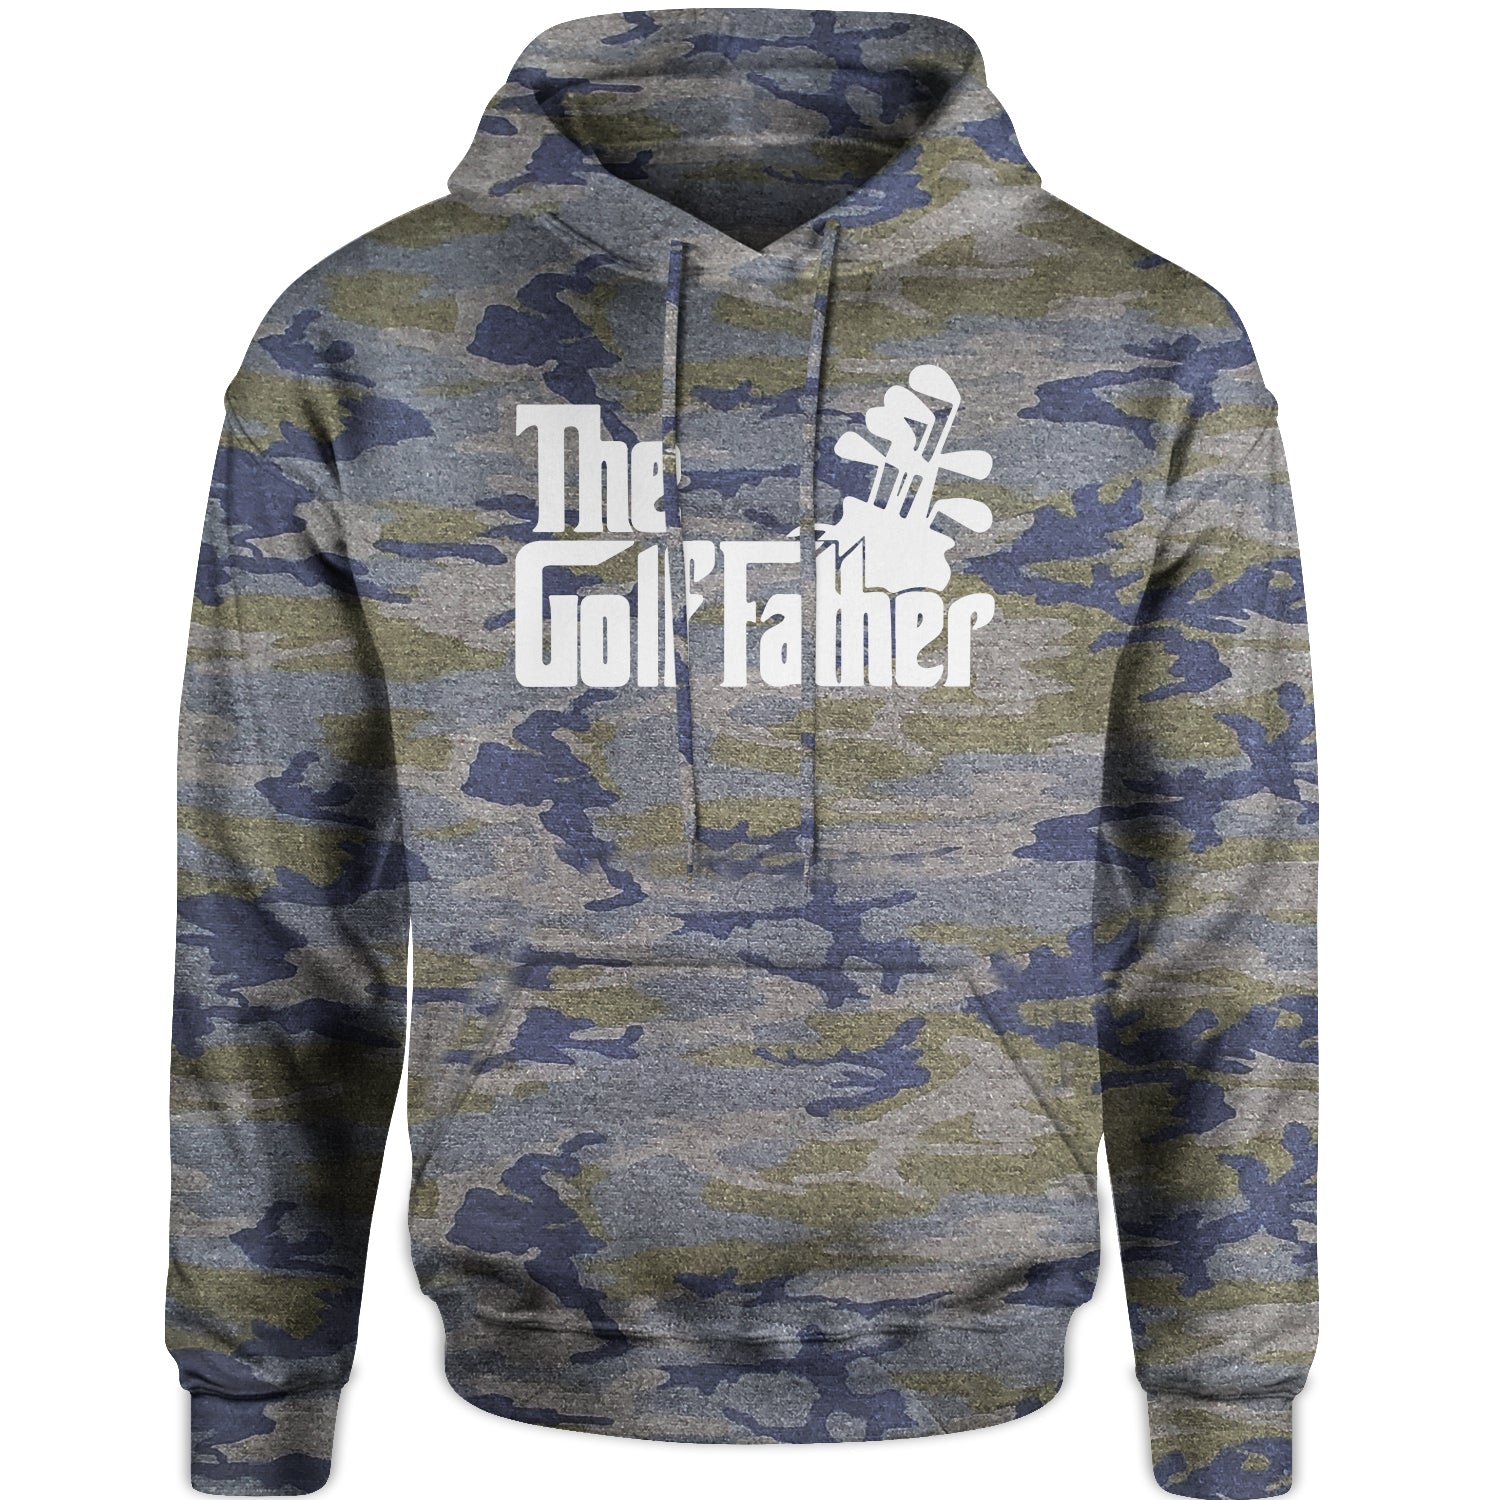 The Golf Father Golfing Dad Adult Hoodie Sweatshirt #expressiontees by Expression Tees